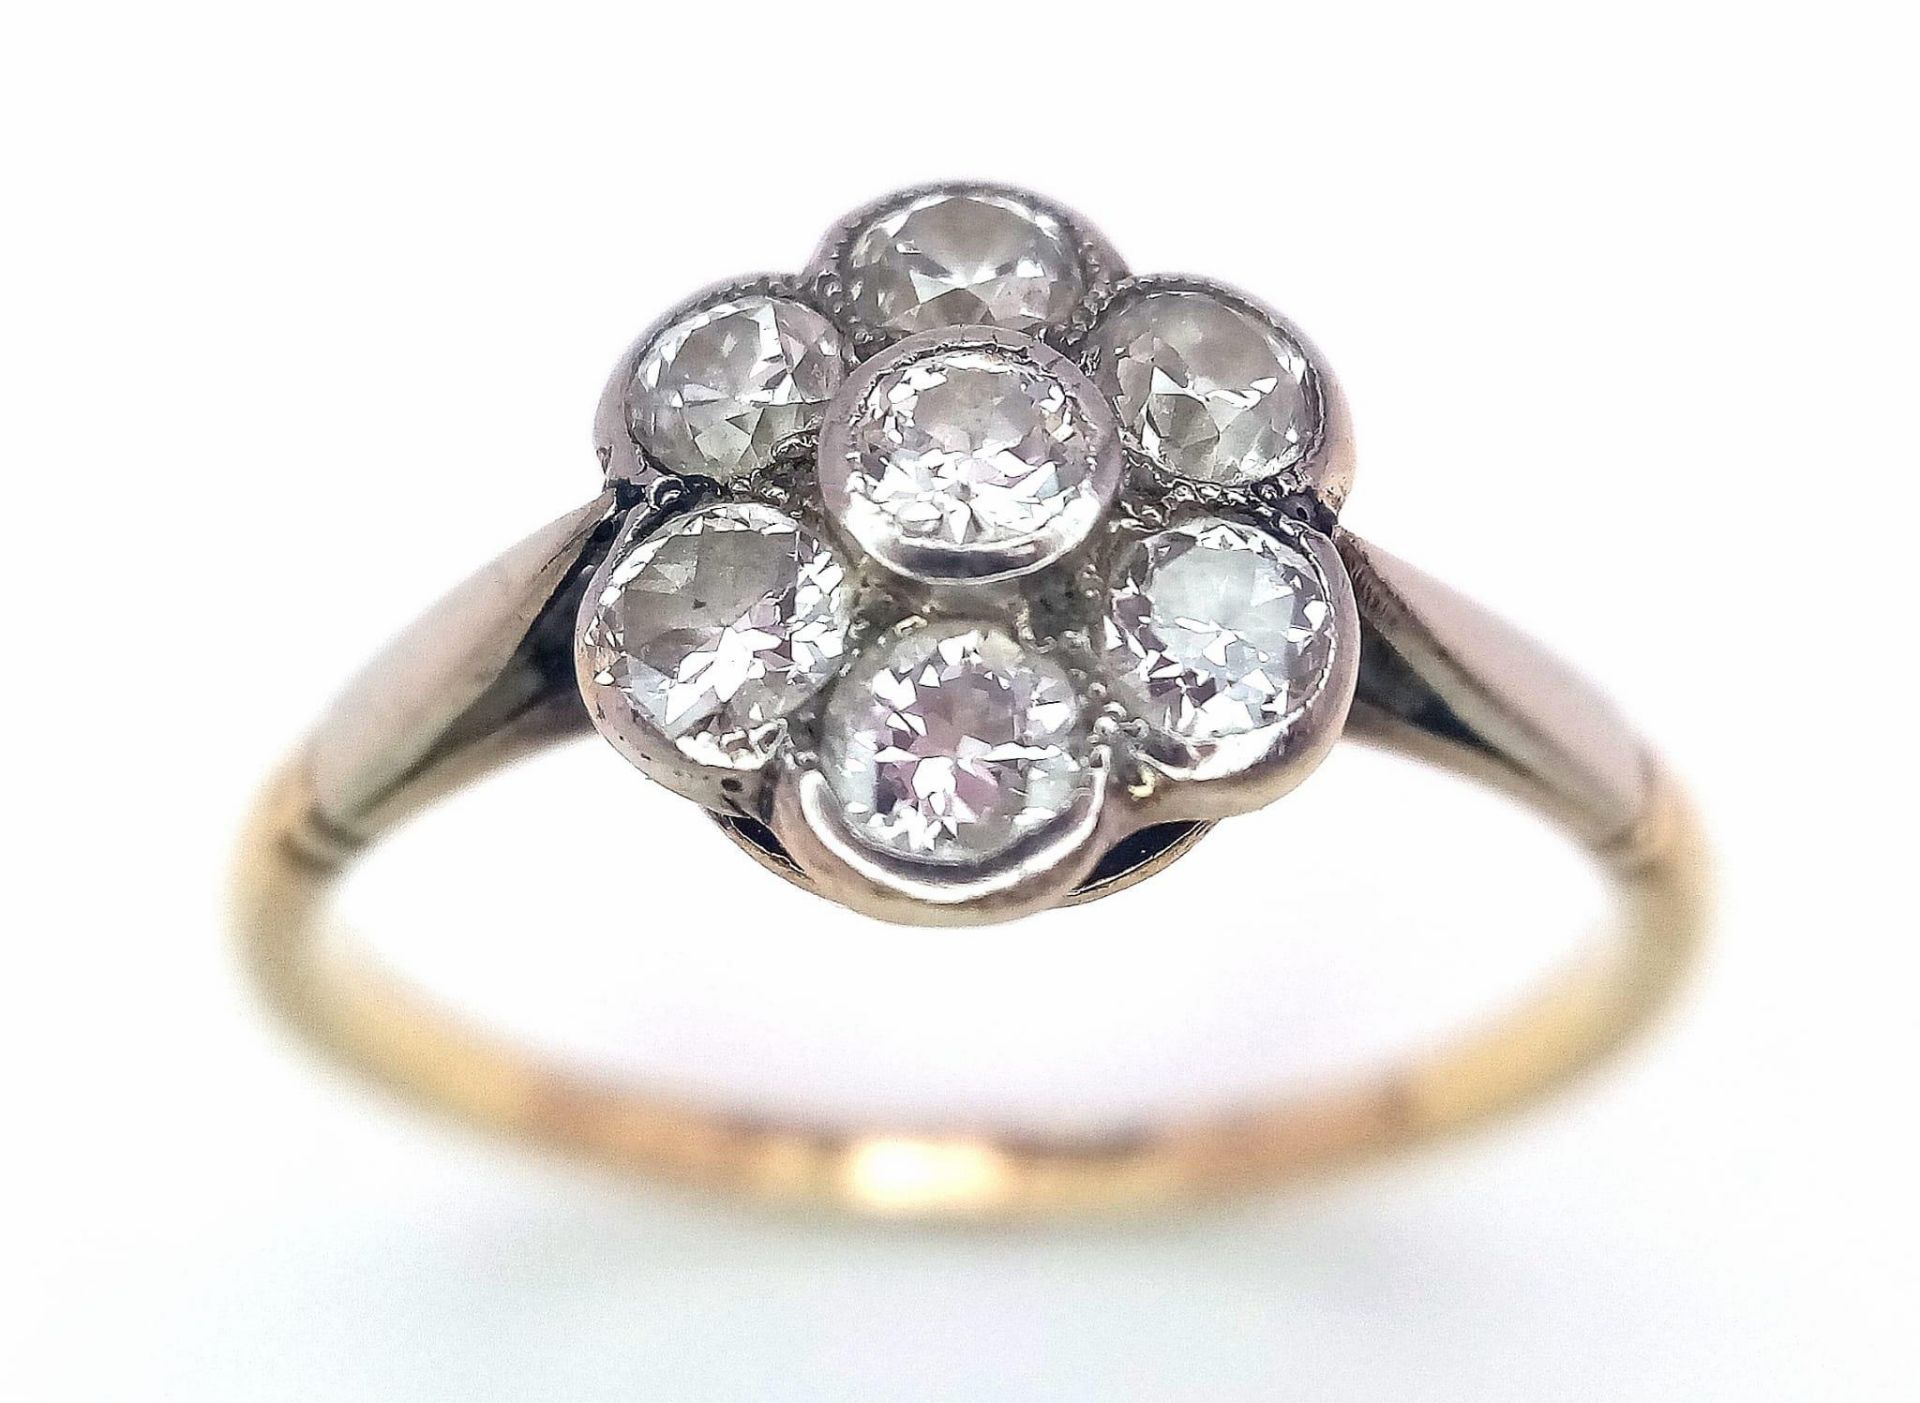 A Vintage 18K Yellow Gold Diamond Ring. Seven round cut diamonds in a floral shape. Size P. 2.52g